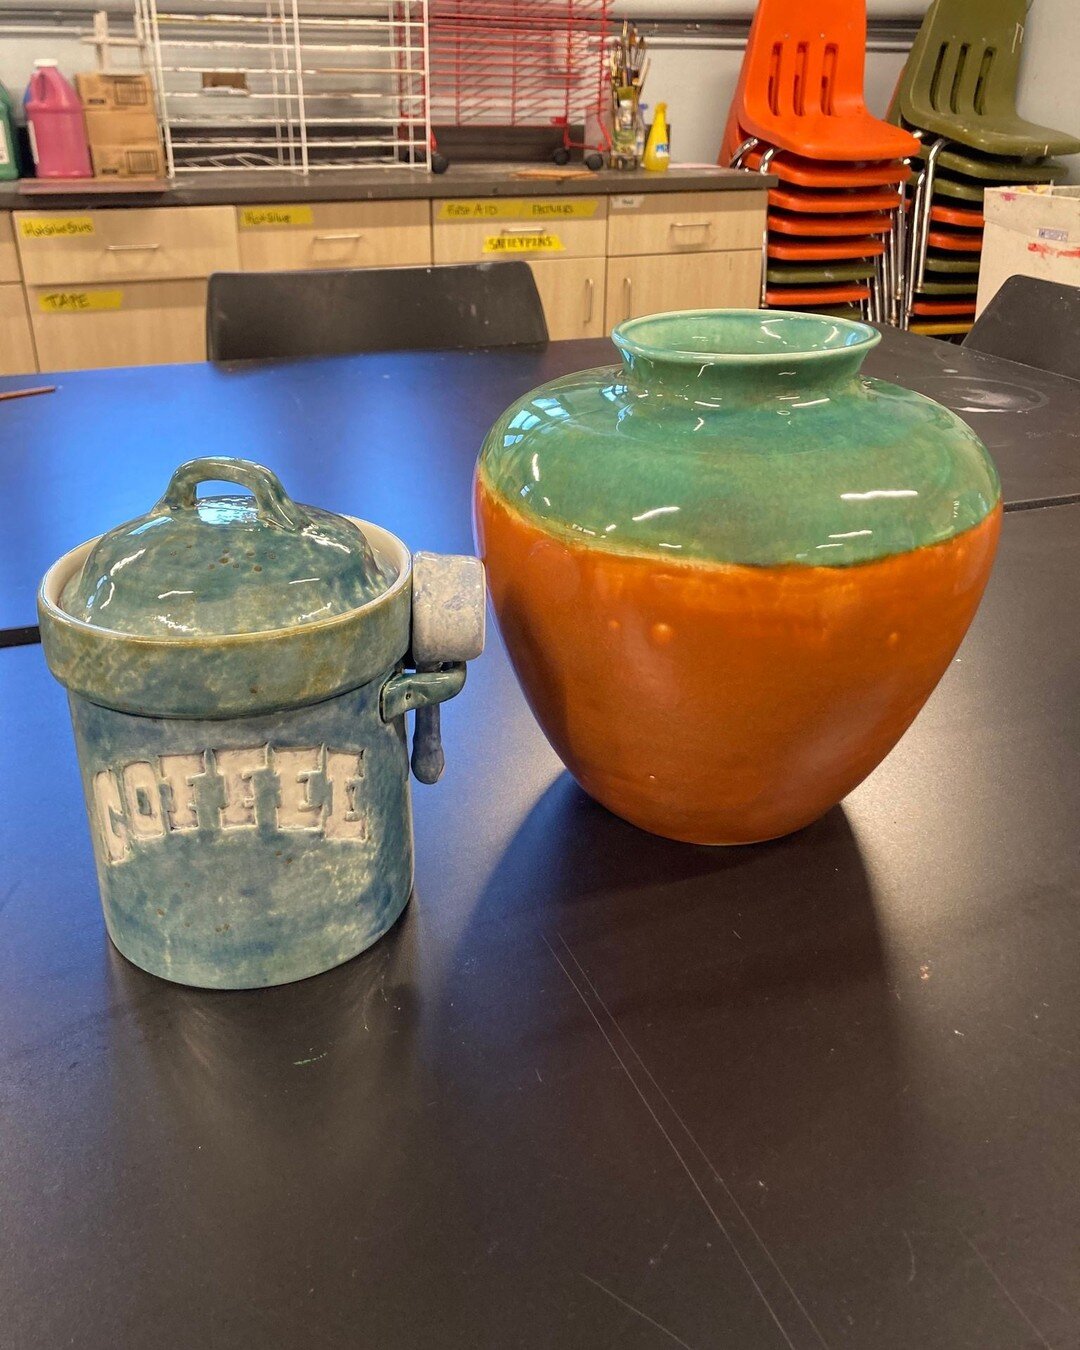 Glazed pieces from Thursday&rsquo;s class are out and looking amazing! 

Due to the abundance of bisqueware pieces still left, we&rsquo;ve added another section of this class on September 30th! Find it under the &ldquo;Register for a Class&rdquo; sec